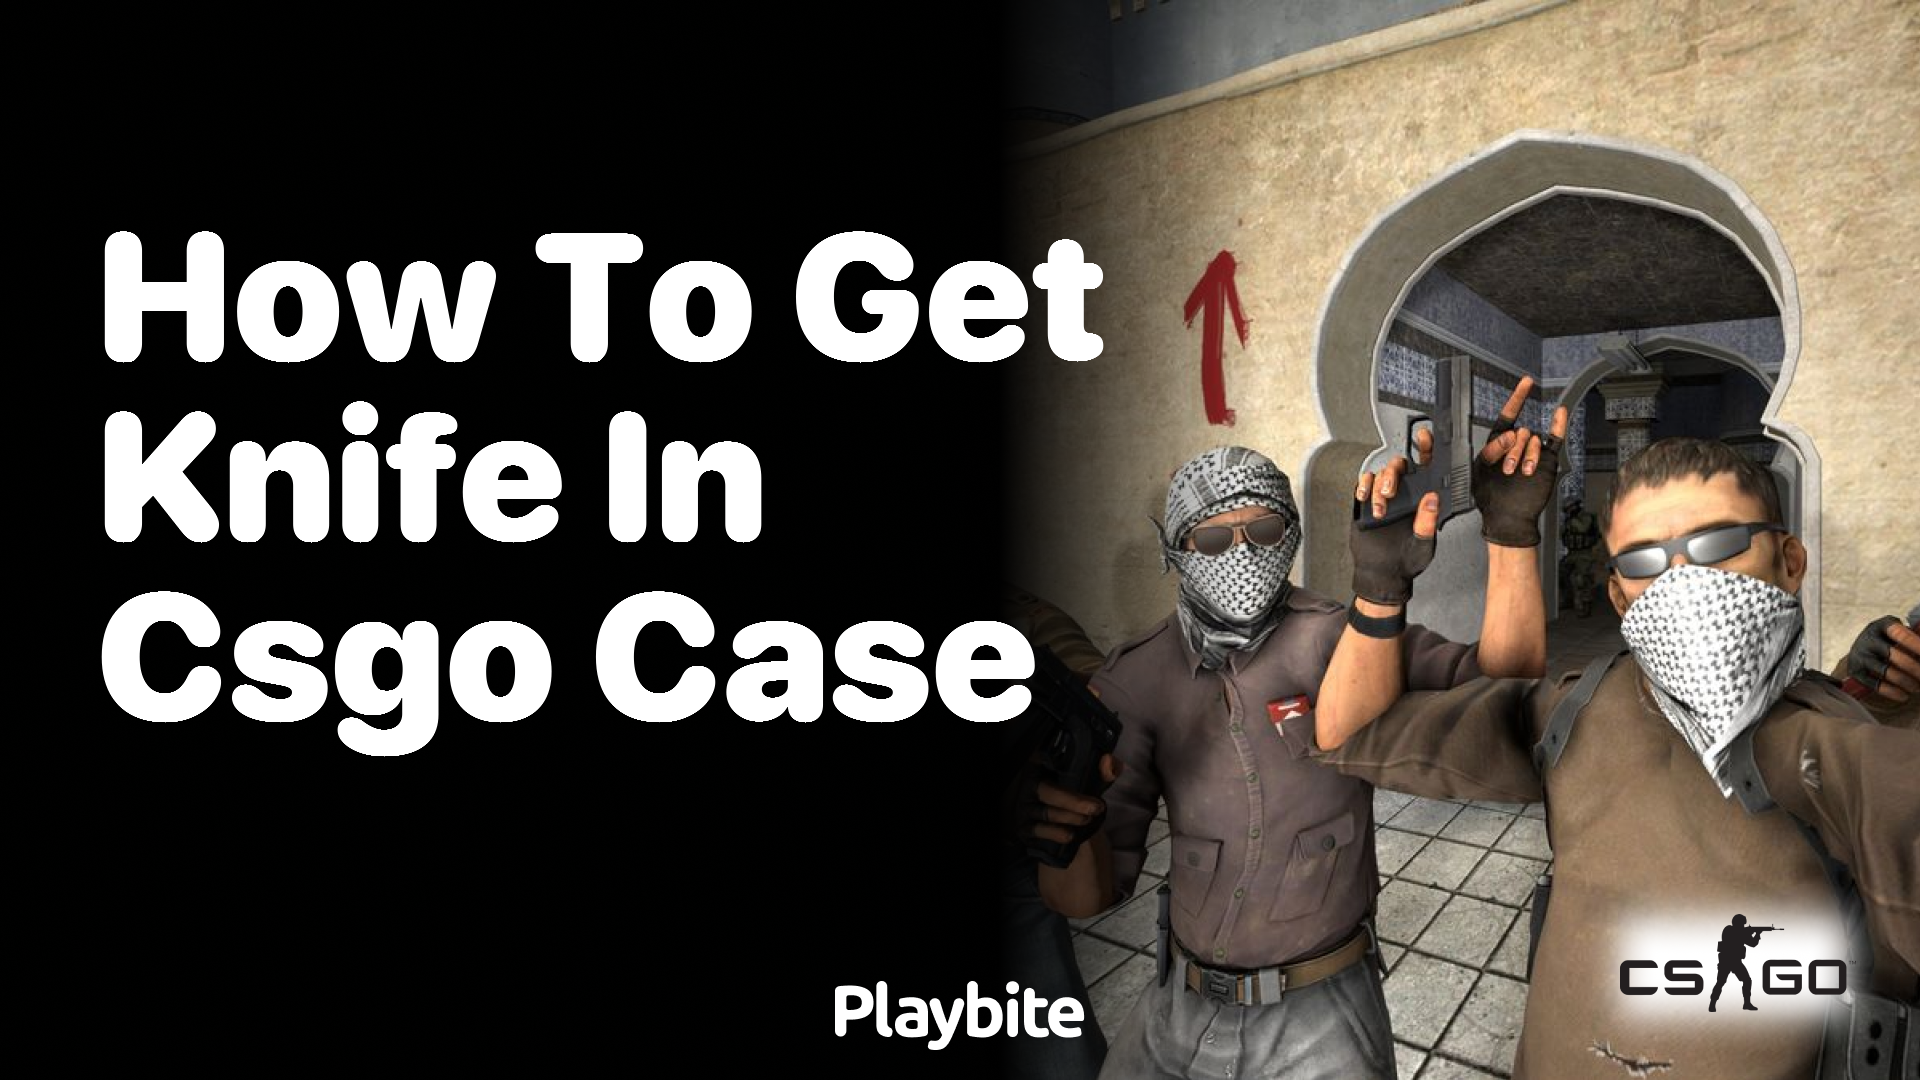 How to Get a Knife in a CS:GO Case